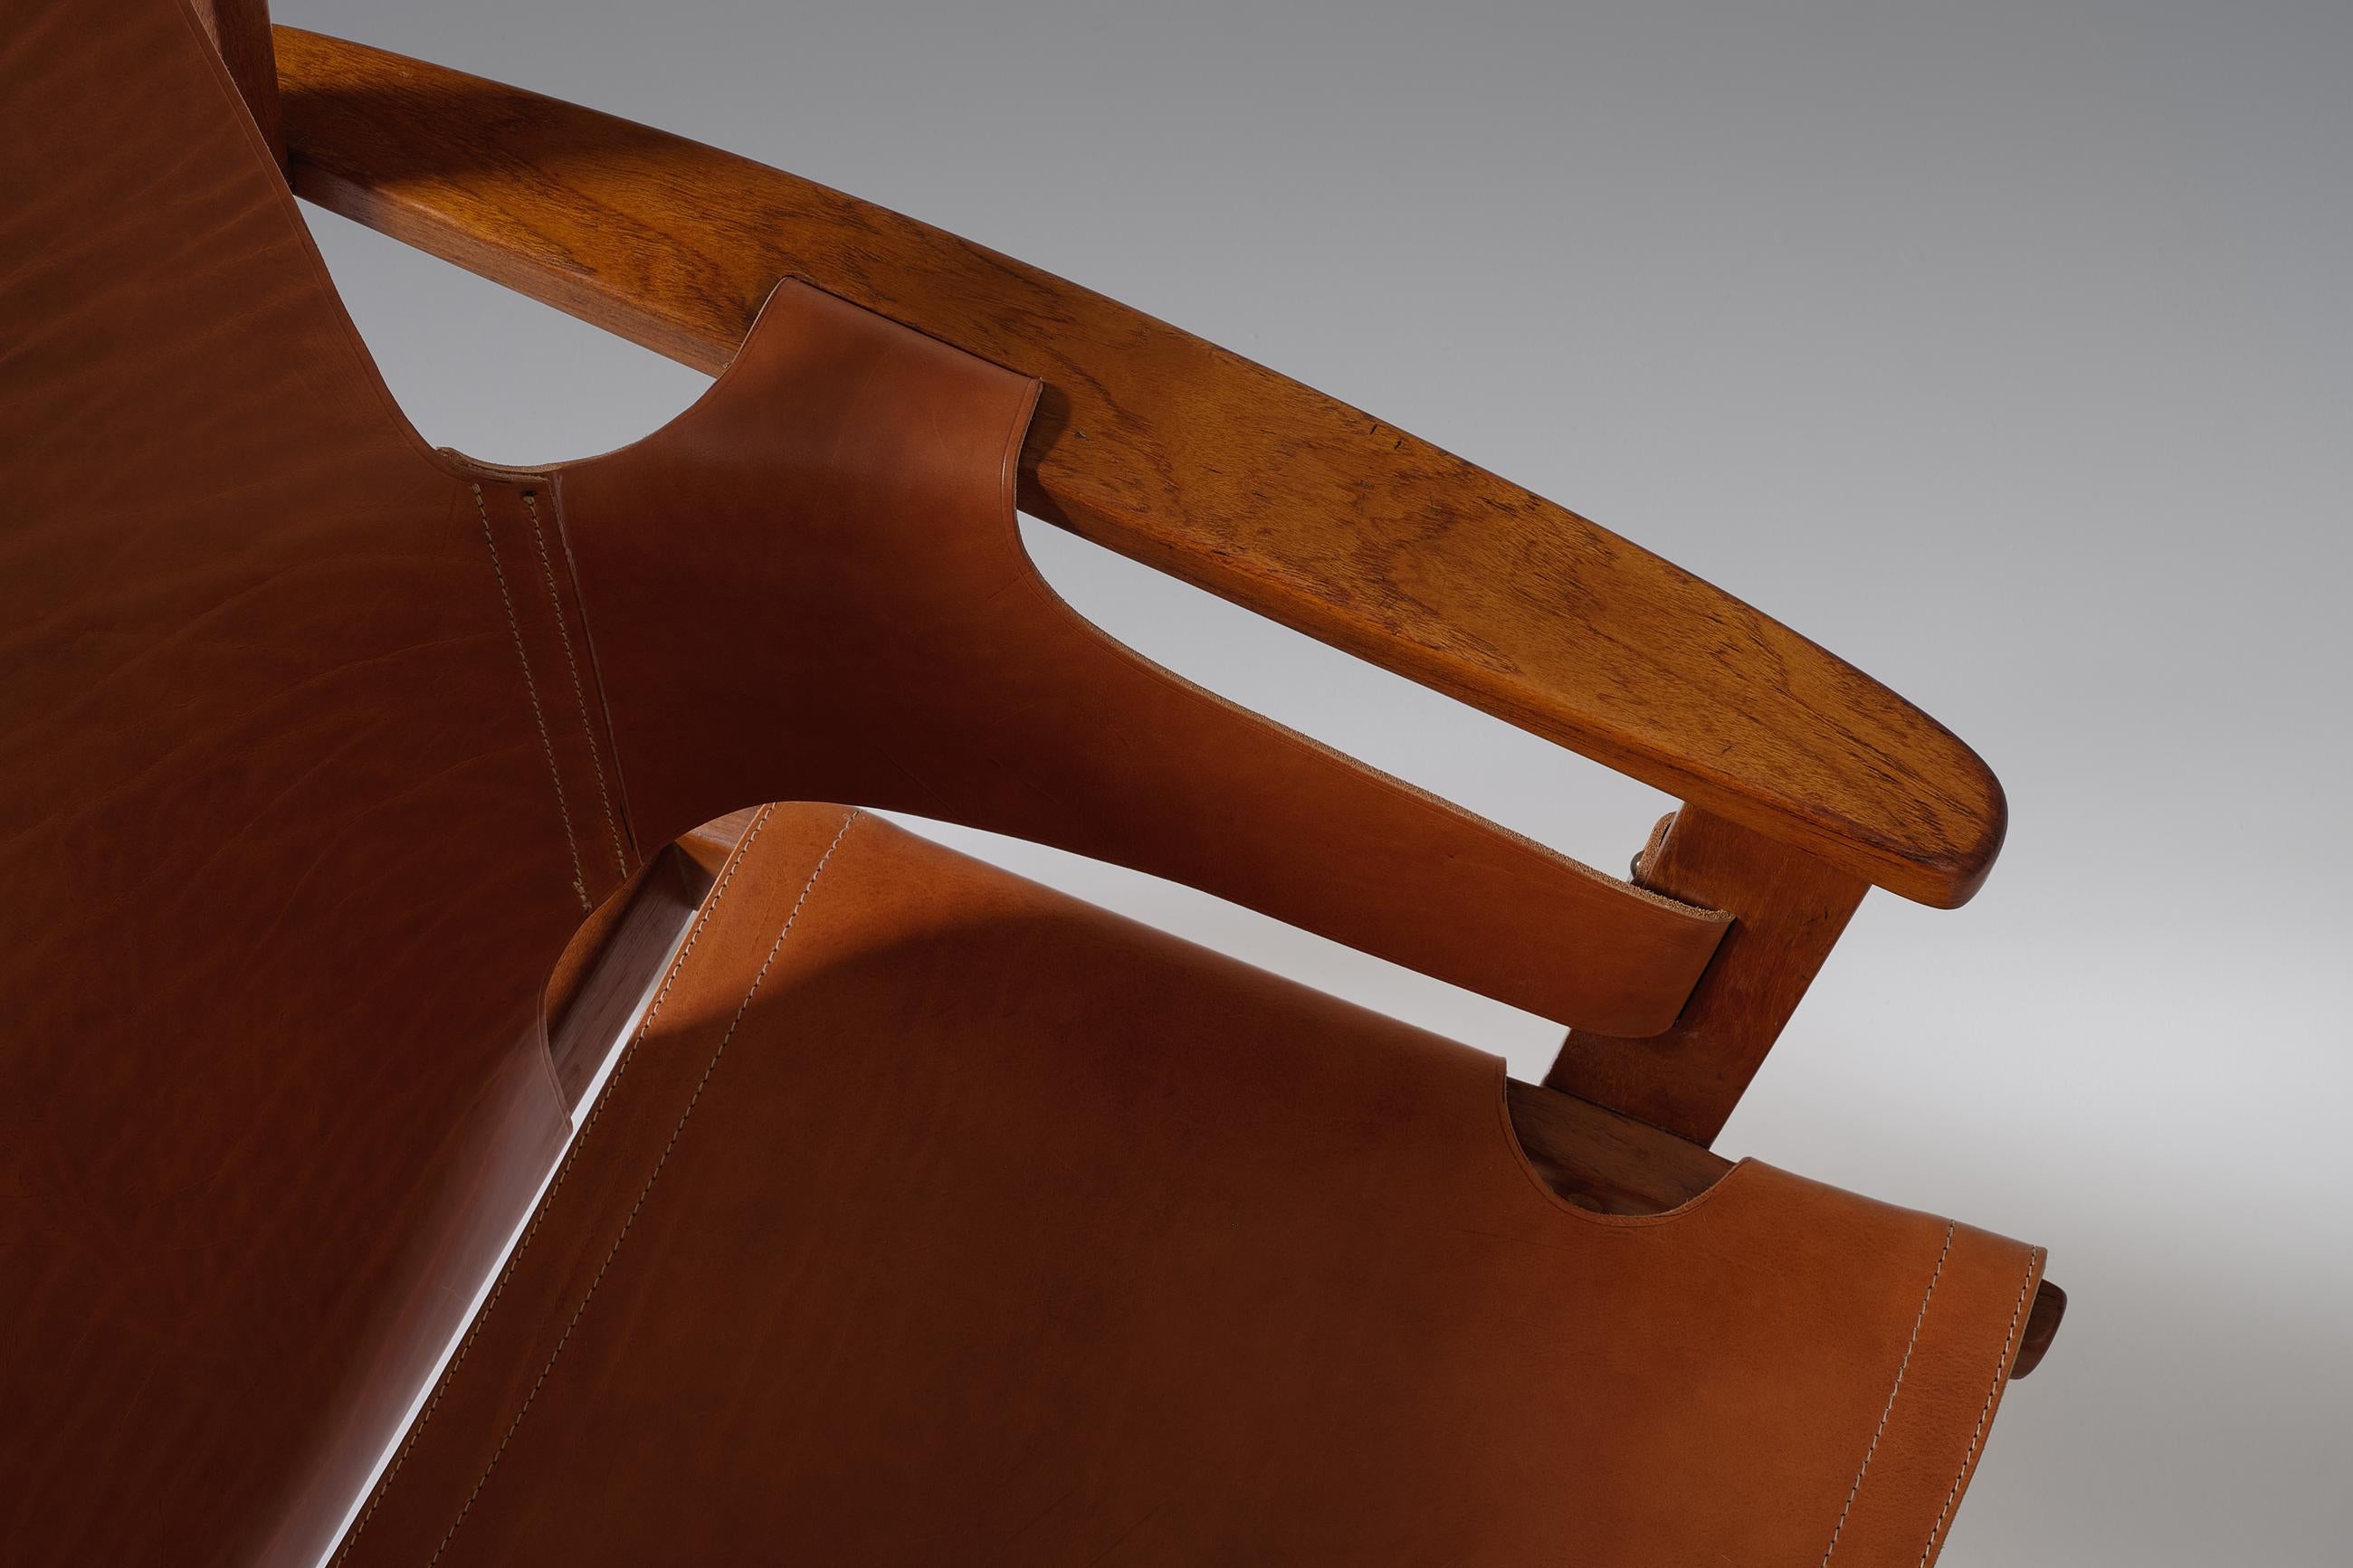 Stained Carl-Axel Acking ‘Triennal’ Lounge Chair